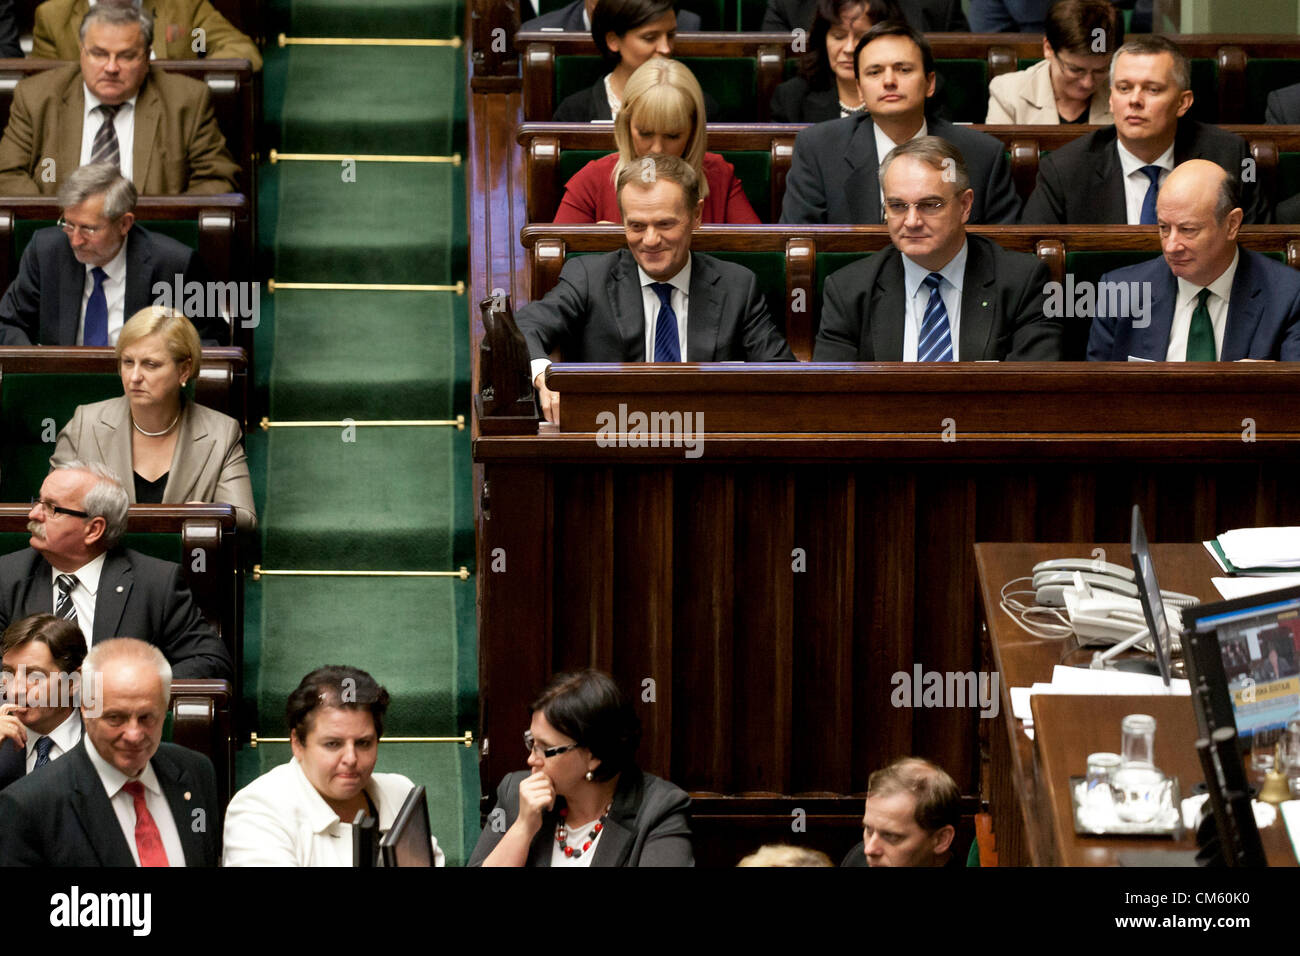 12th of October 2012. Warsaw, Poland. Expose of Prime minister and Vote of confidence for current goverment in Parliment (Sejm). On the picture - prime minister Donald Tusk (left) , vice-prime minister Waldemar Pawlak (center left) , minister of finance Jacek Rostowski (center right ) Stock Photo